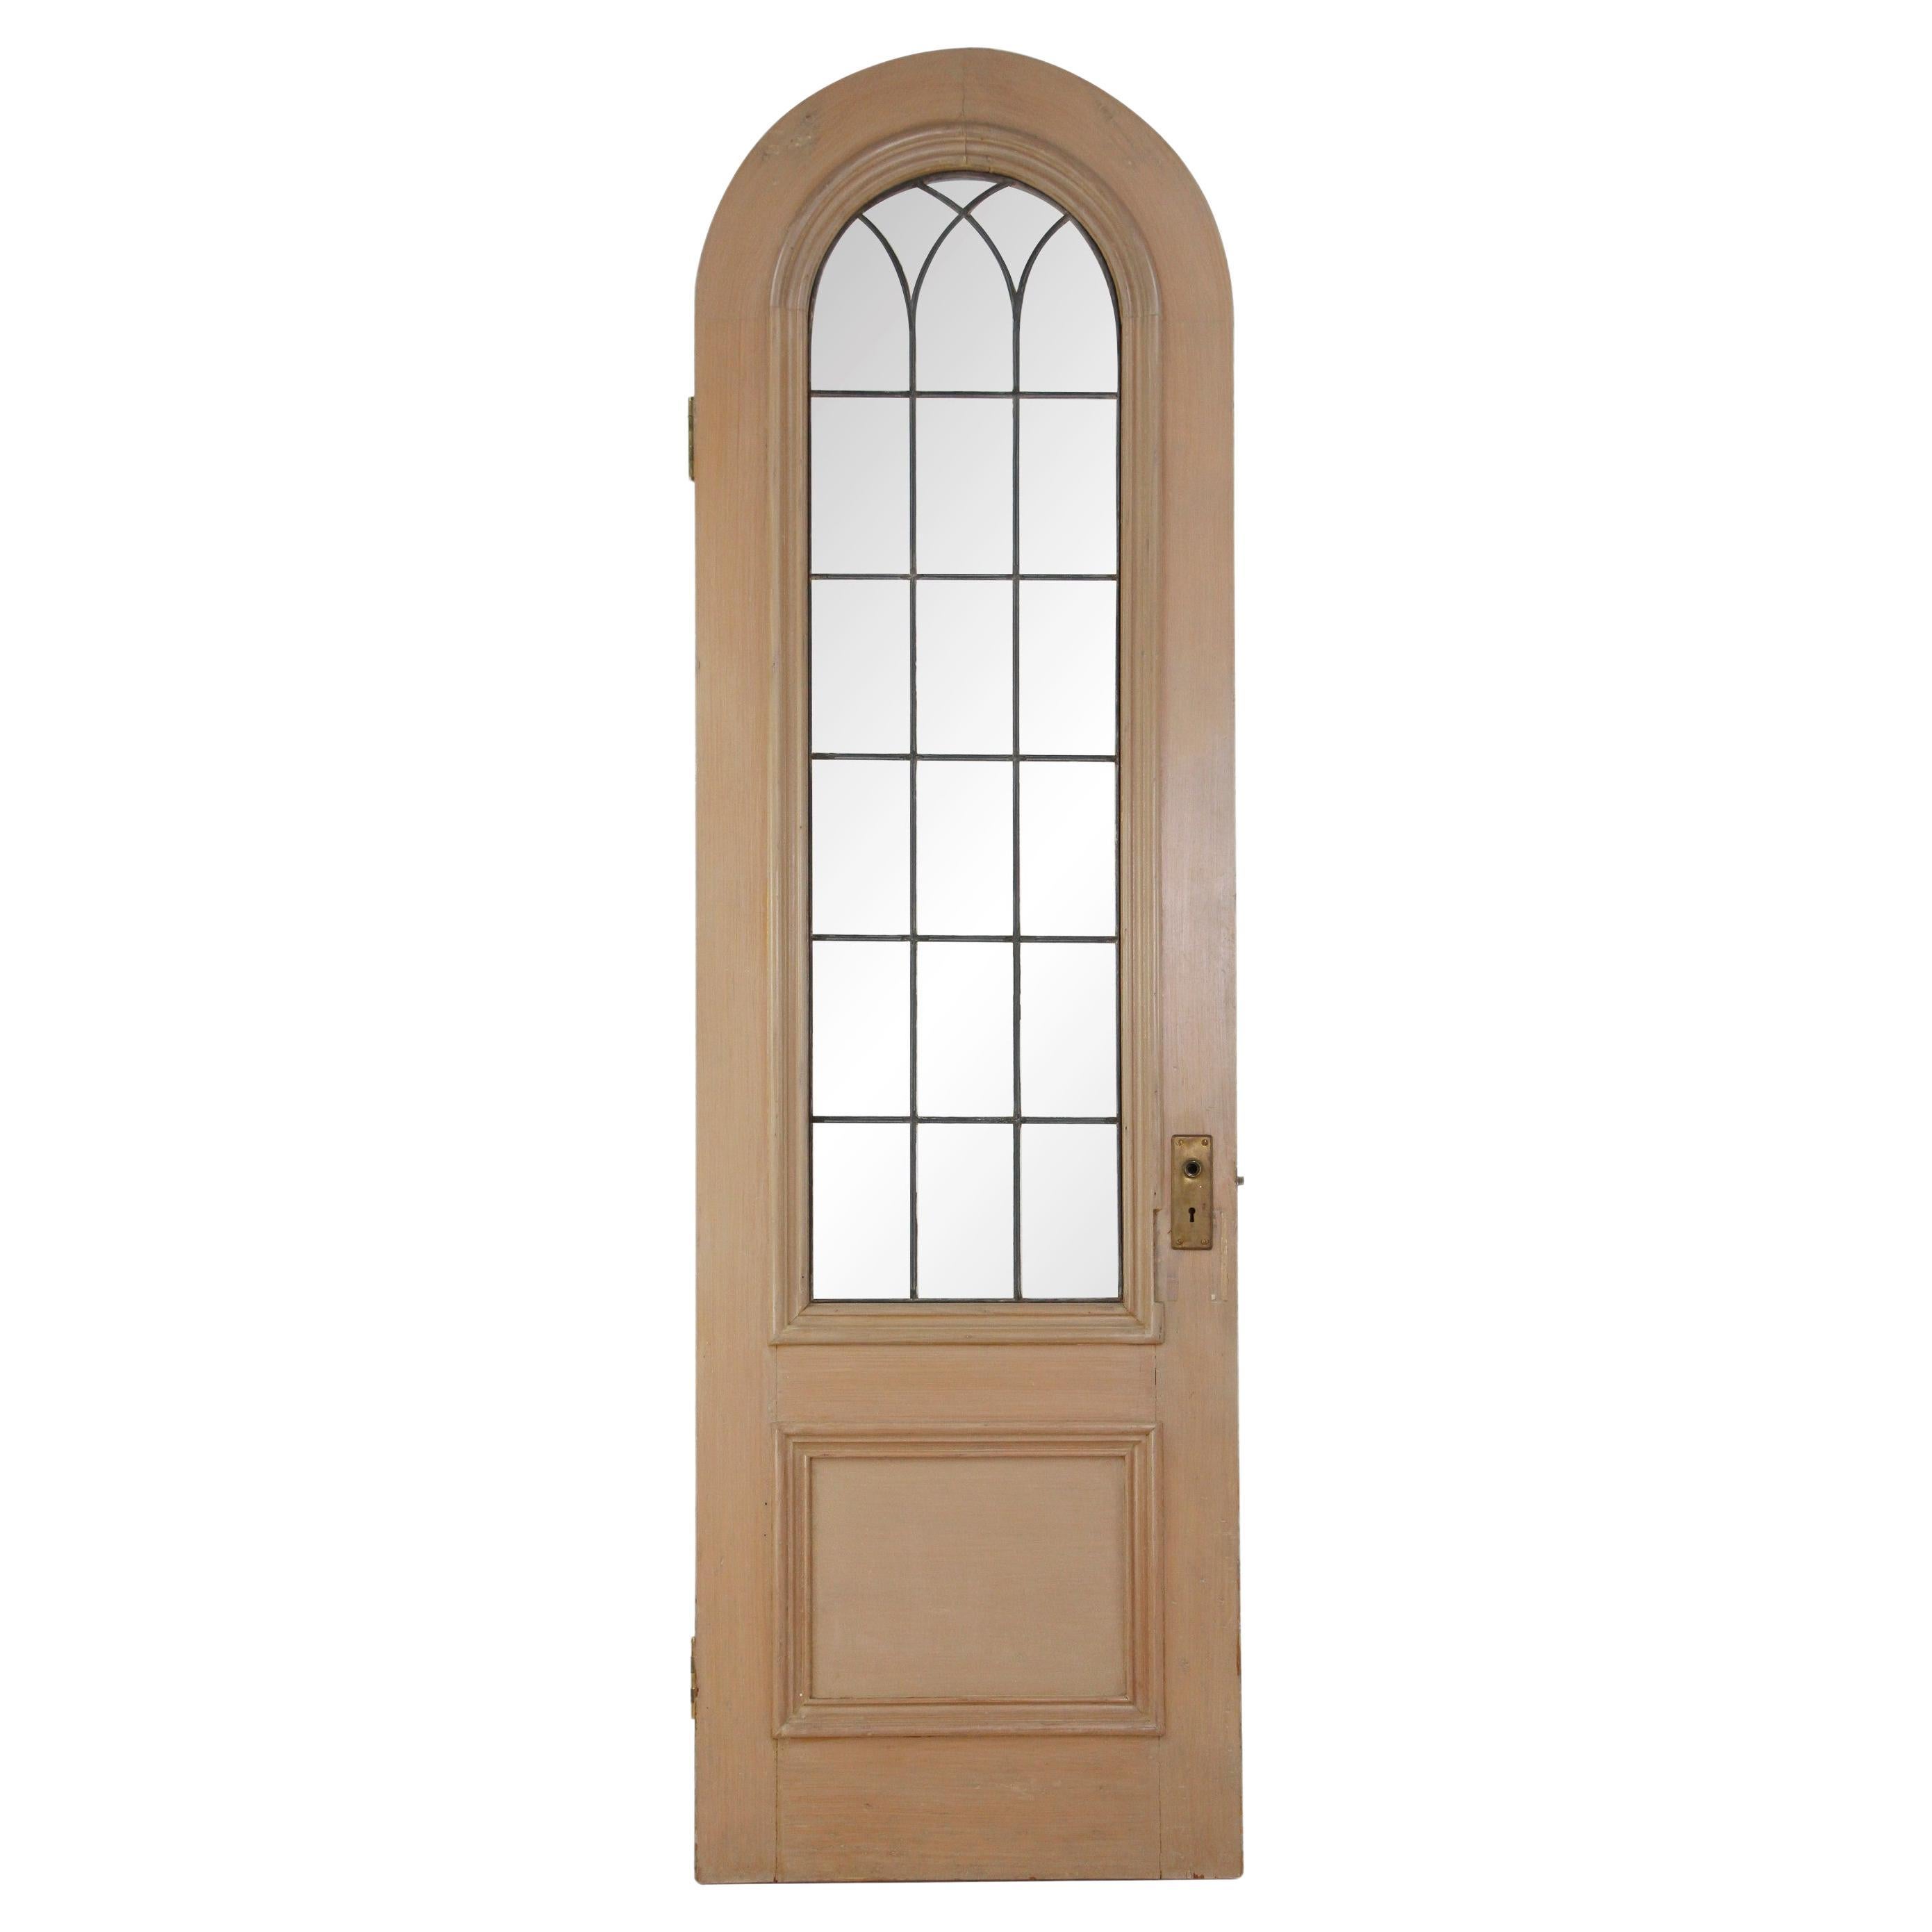 Arched American Wood Door Leaded Glass Window